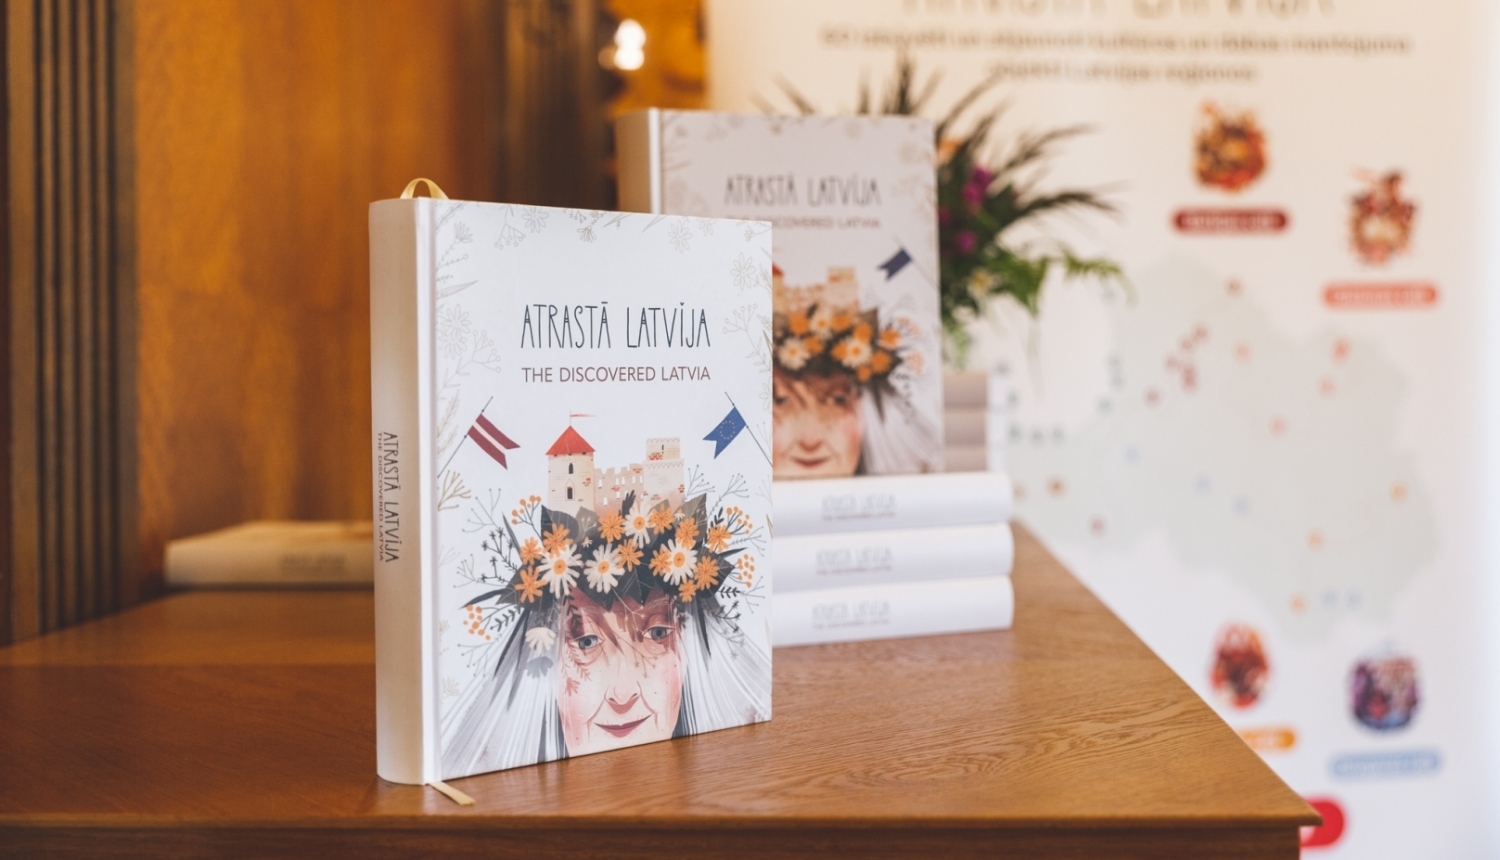 The book "The Discovered Latvia"